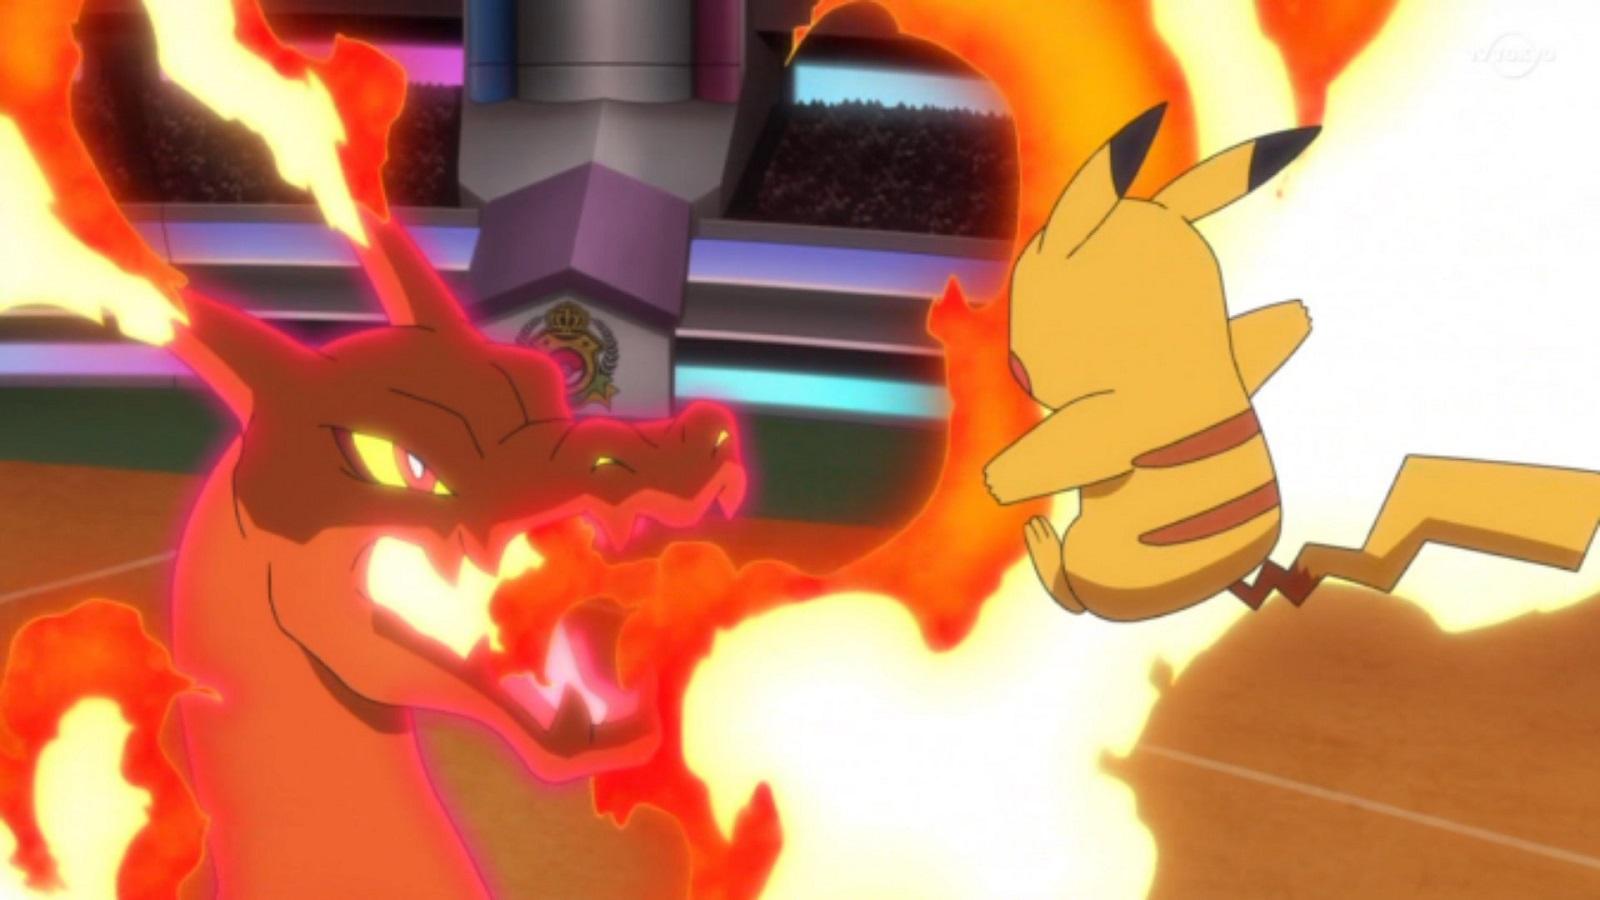 Pokemon anime schedule leaked with new episodes after Ultimate Journeys -  Dexerto